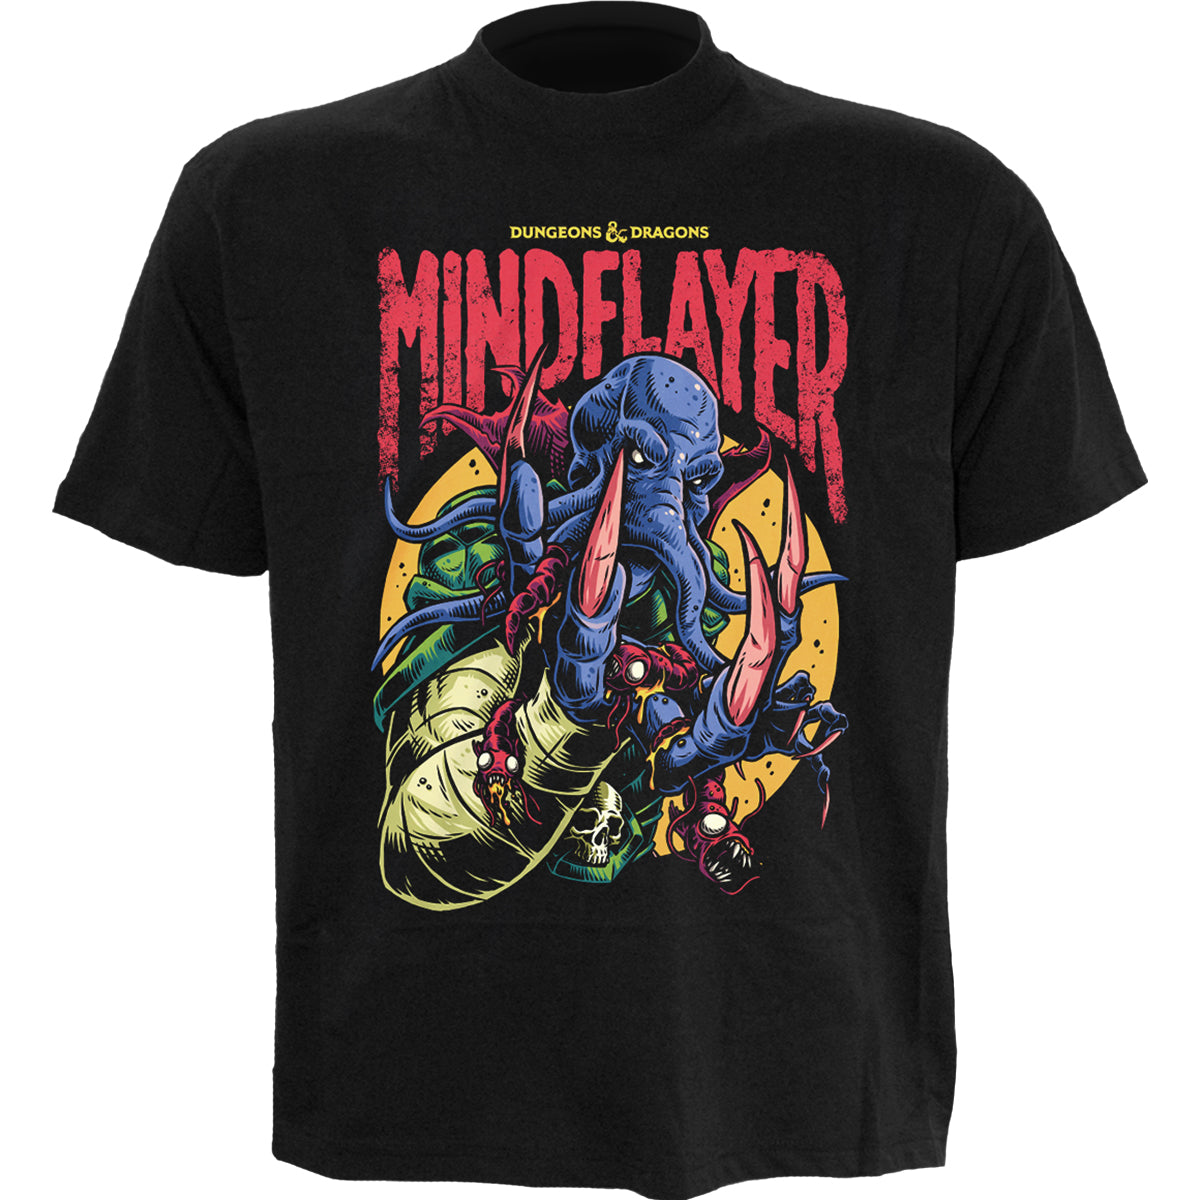 DUNGEONS AND DRAGONS - MINDFLAYER COLOUR POP - Front Print T-Shirt Black